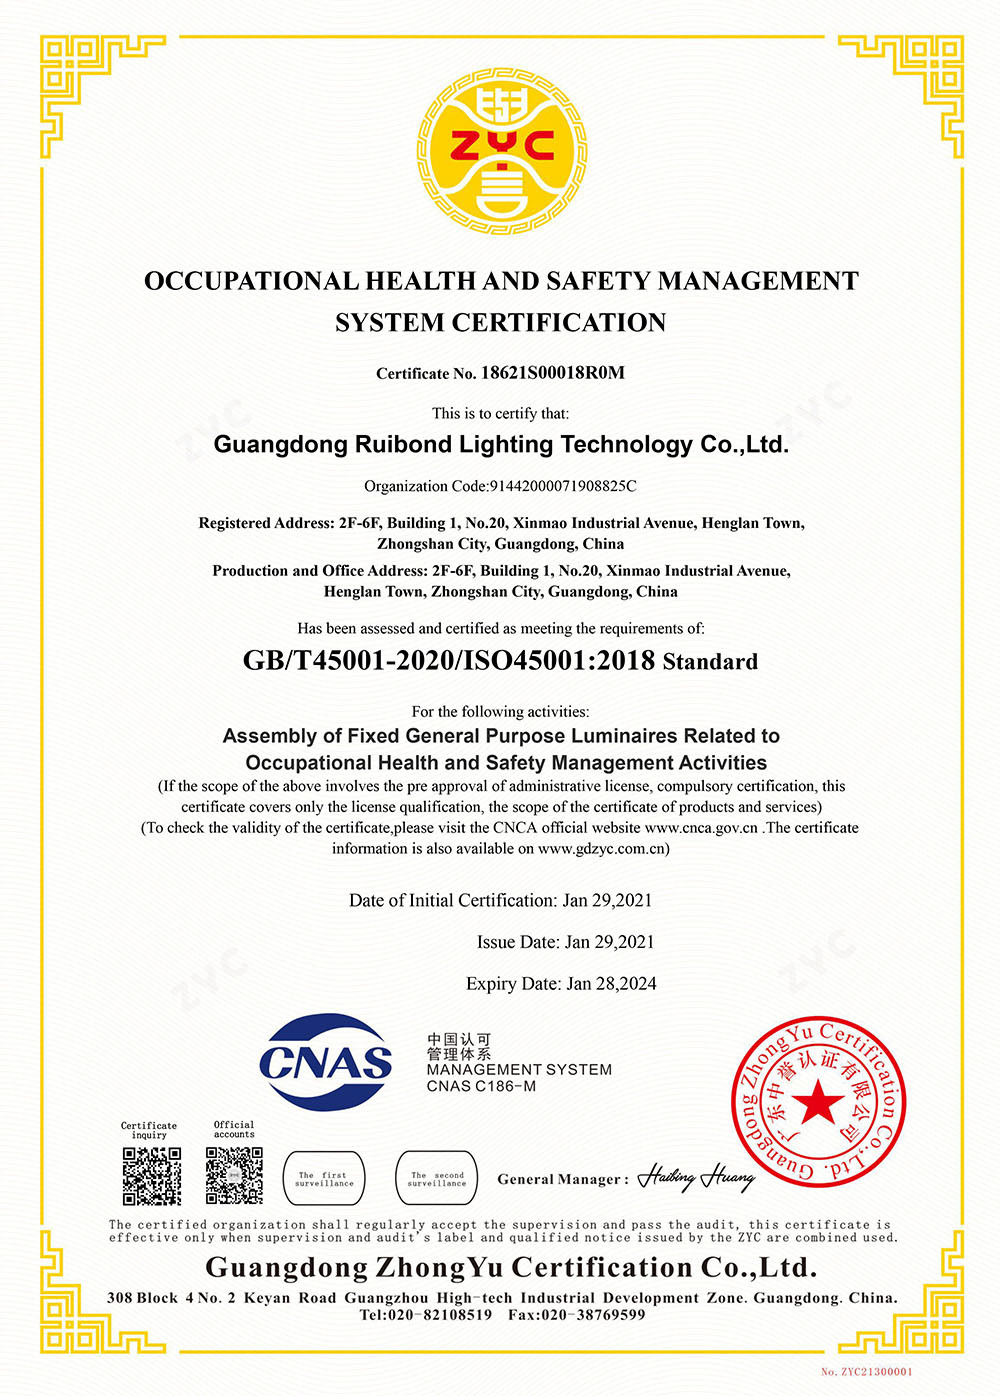 Occupational Health and Safety Management System Certification ISO45001 English